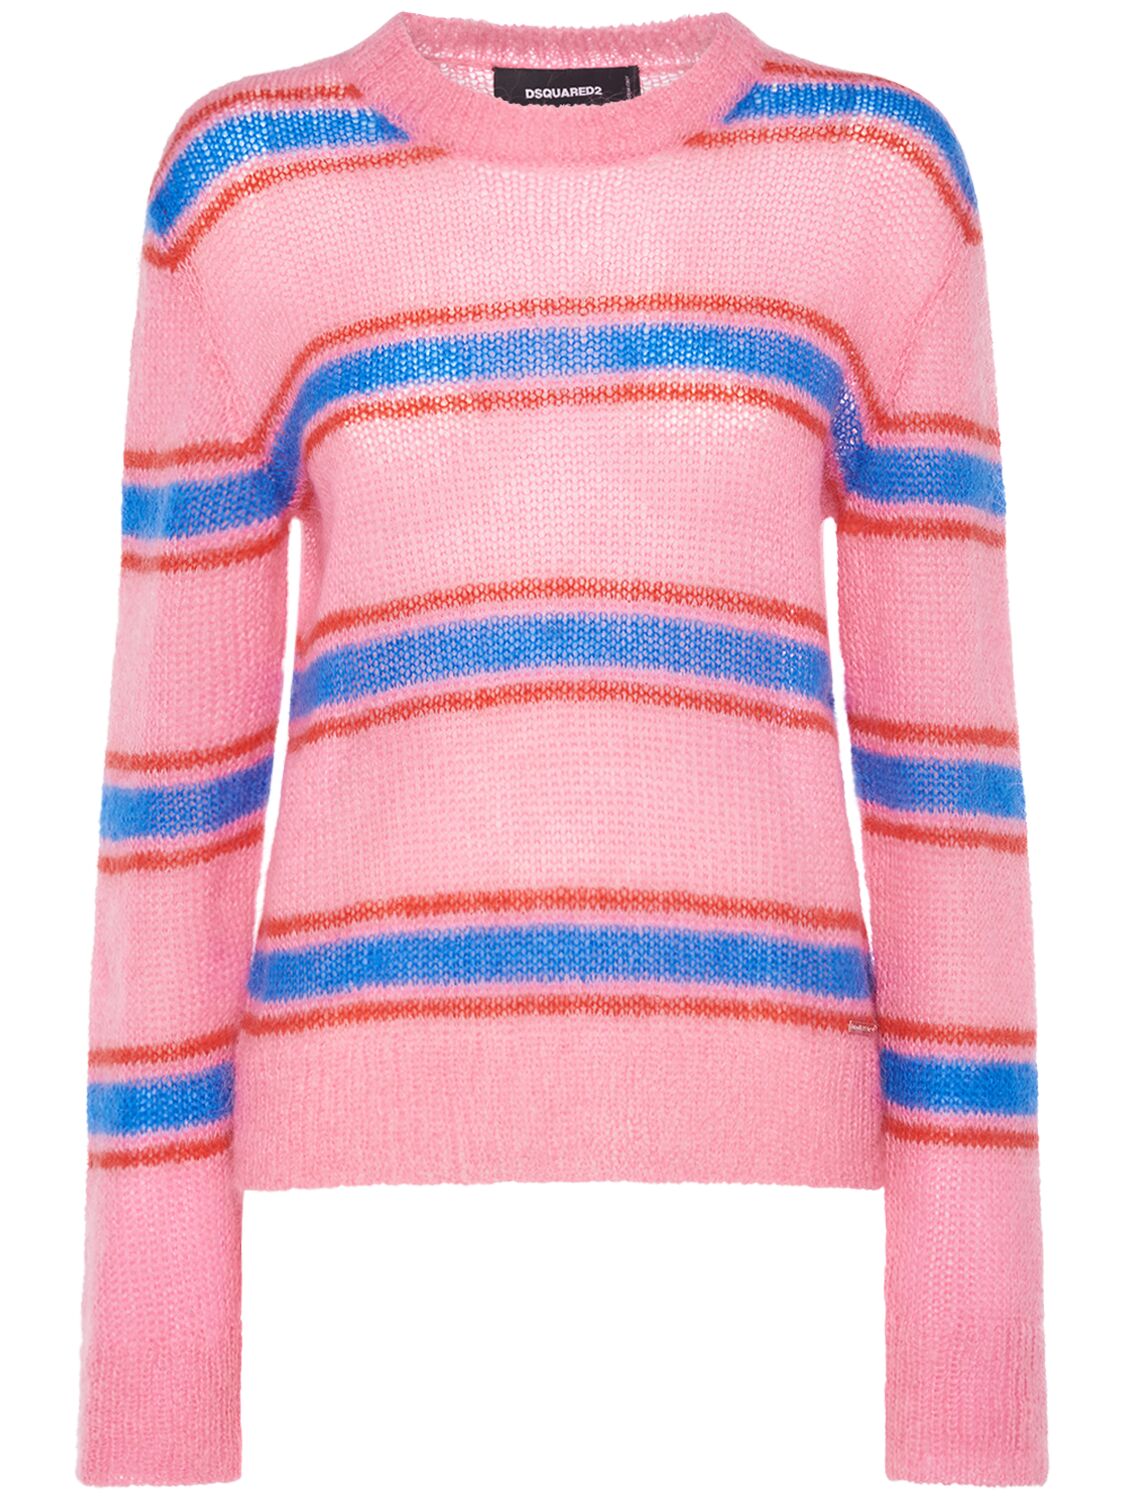 Dsquared2 Mohair Blend Striped Crewneck Sweater In Pink,blue,red